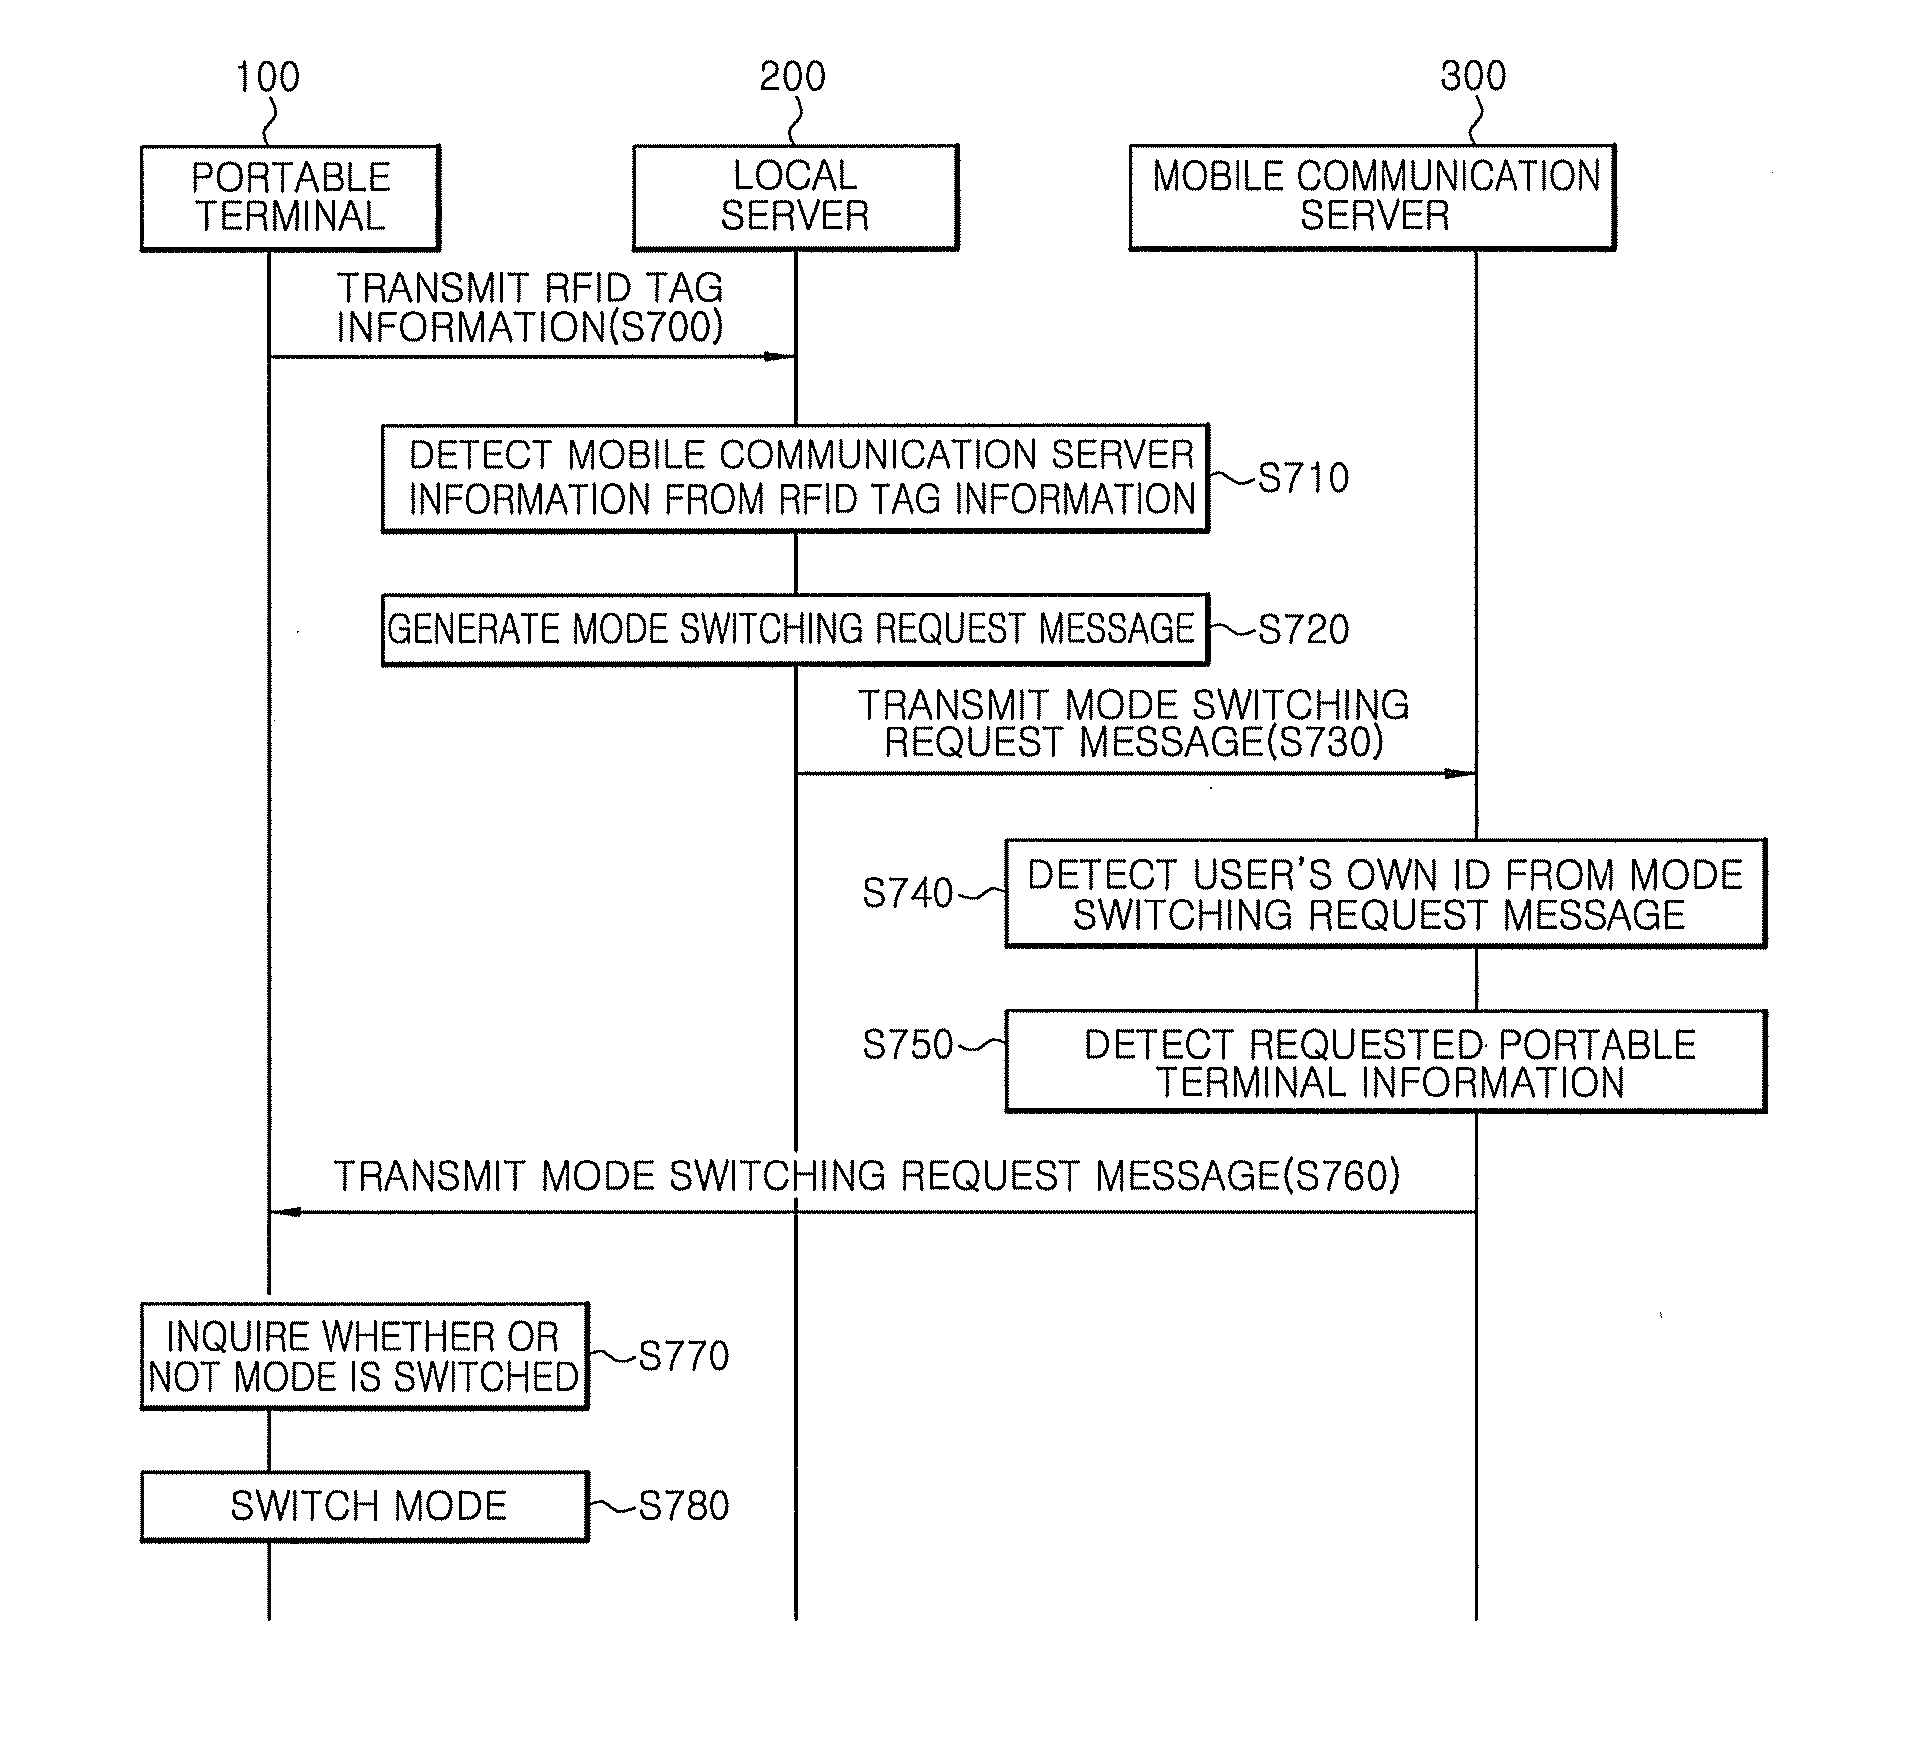 Portable terminal with RFID tag and method for providing local service using RFID tag thereof